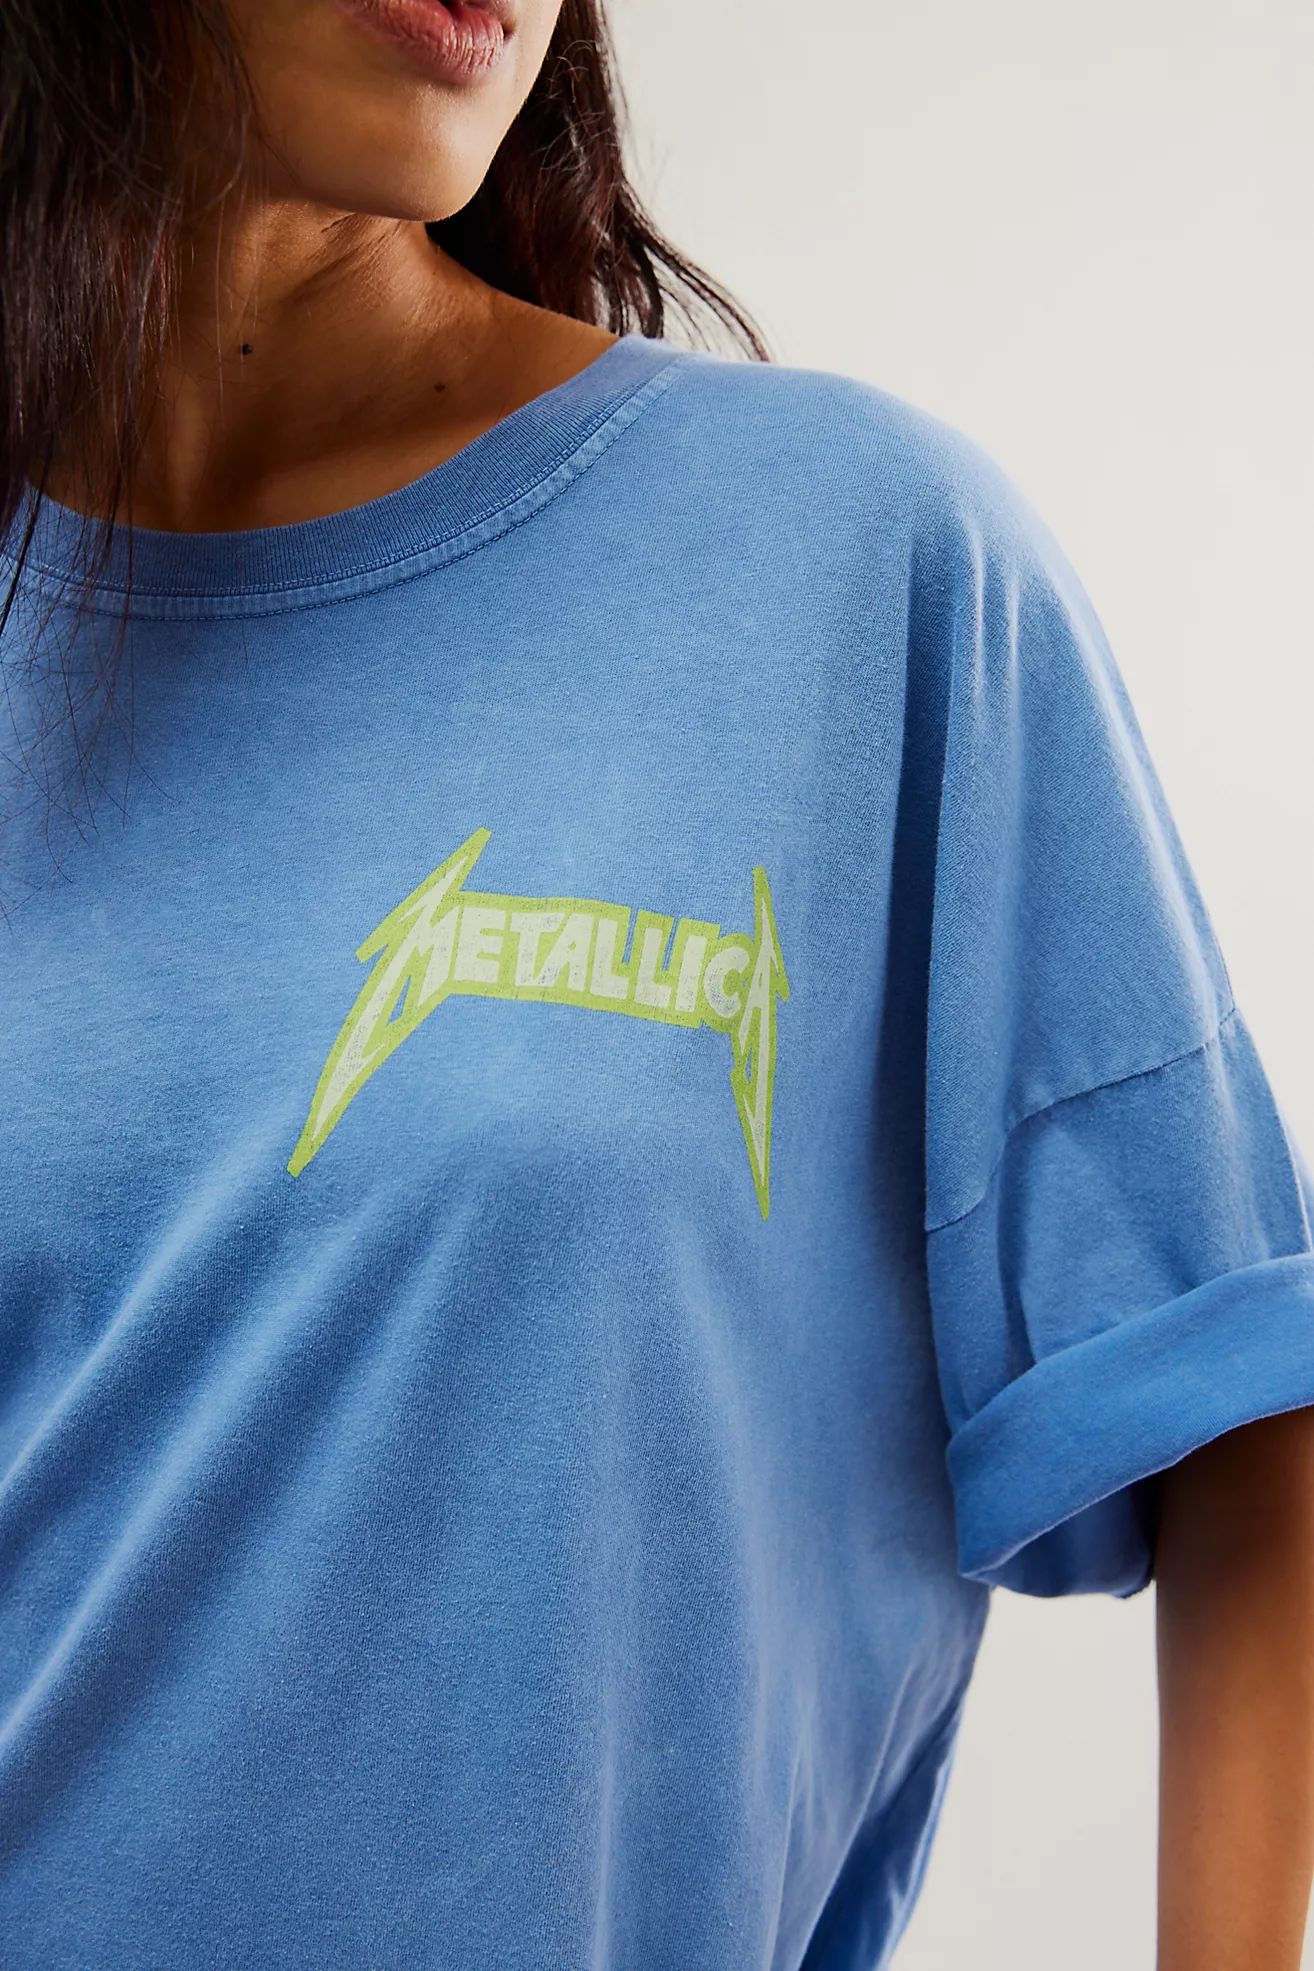 Metallica US Tour 1985 One Size Tee | Free People (Global - UK&FR Excluded)